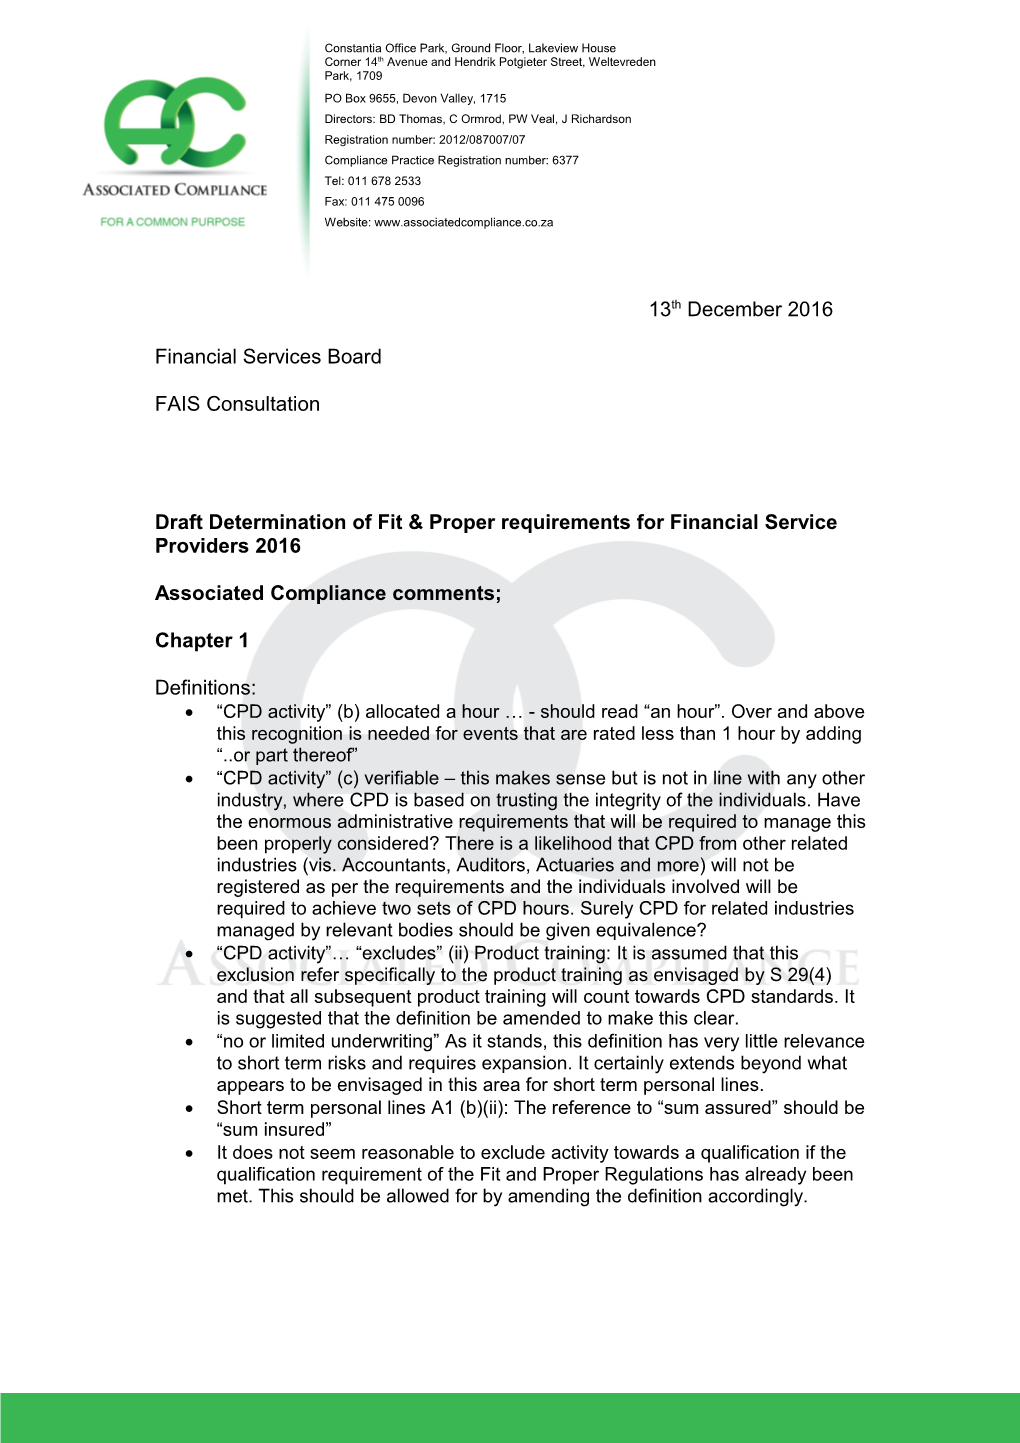 Draft Determination of Fit & Proper Requirements for Financial Service Providers 2016